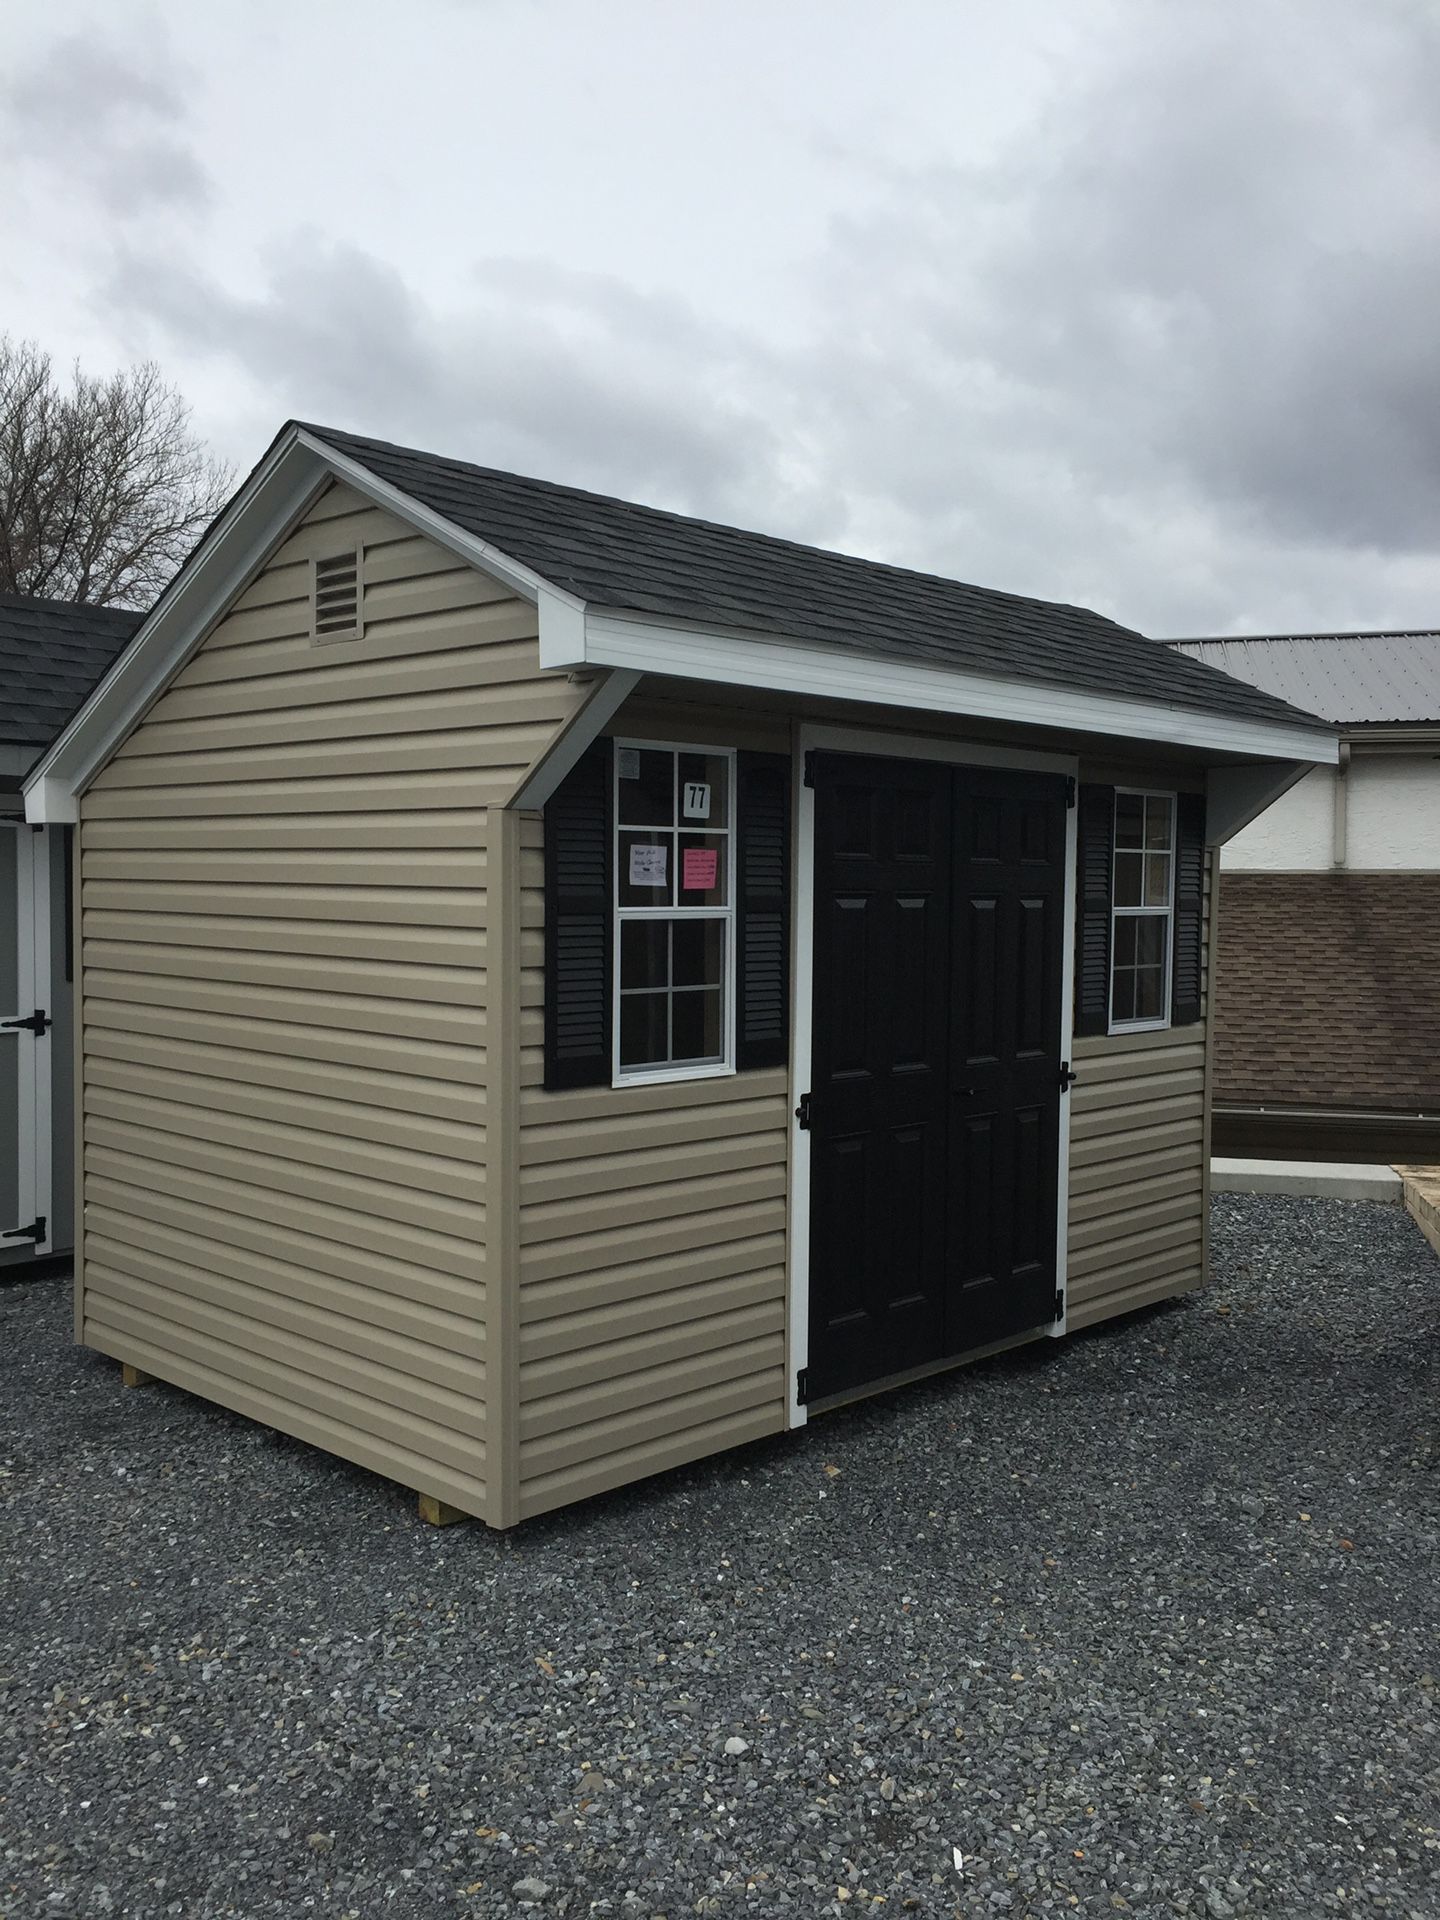 New 8x12 Vinyl Carriage Shed #77